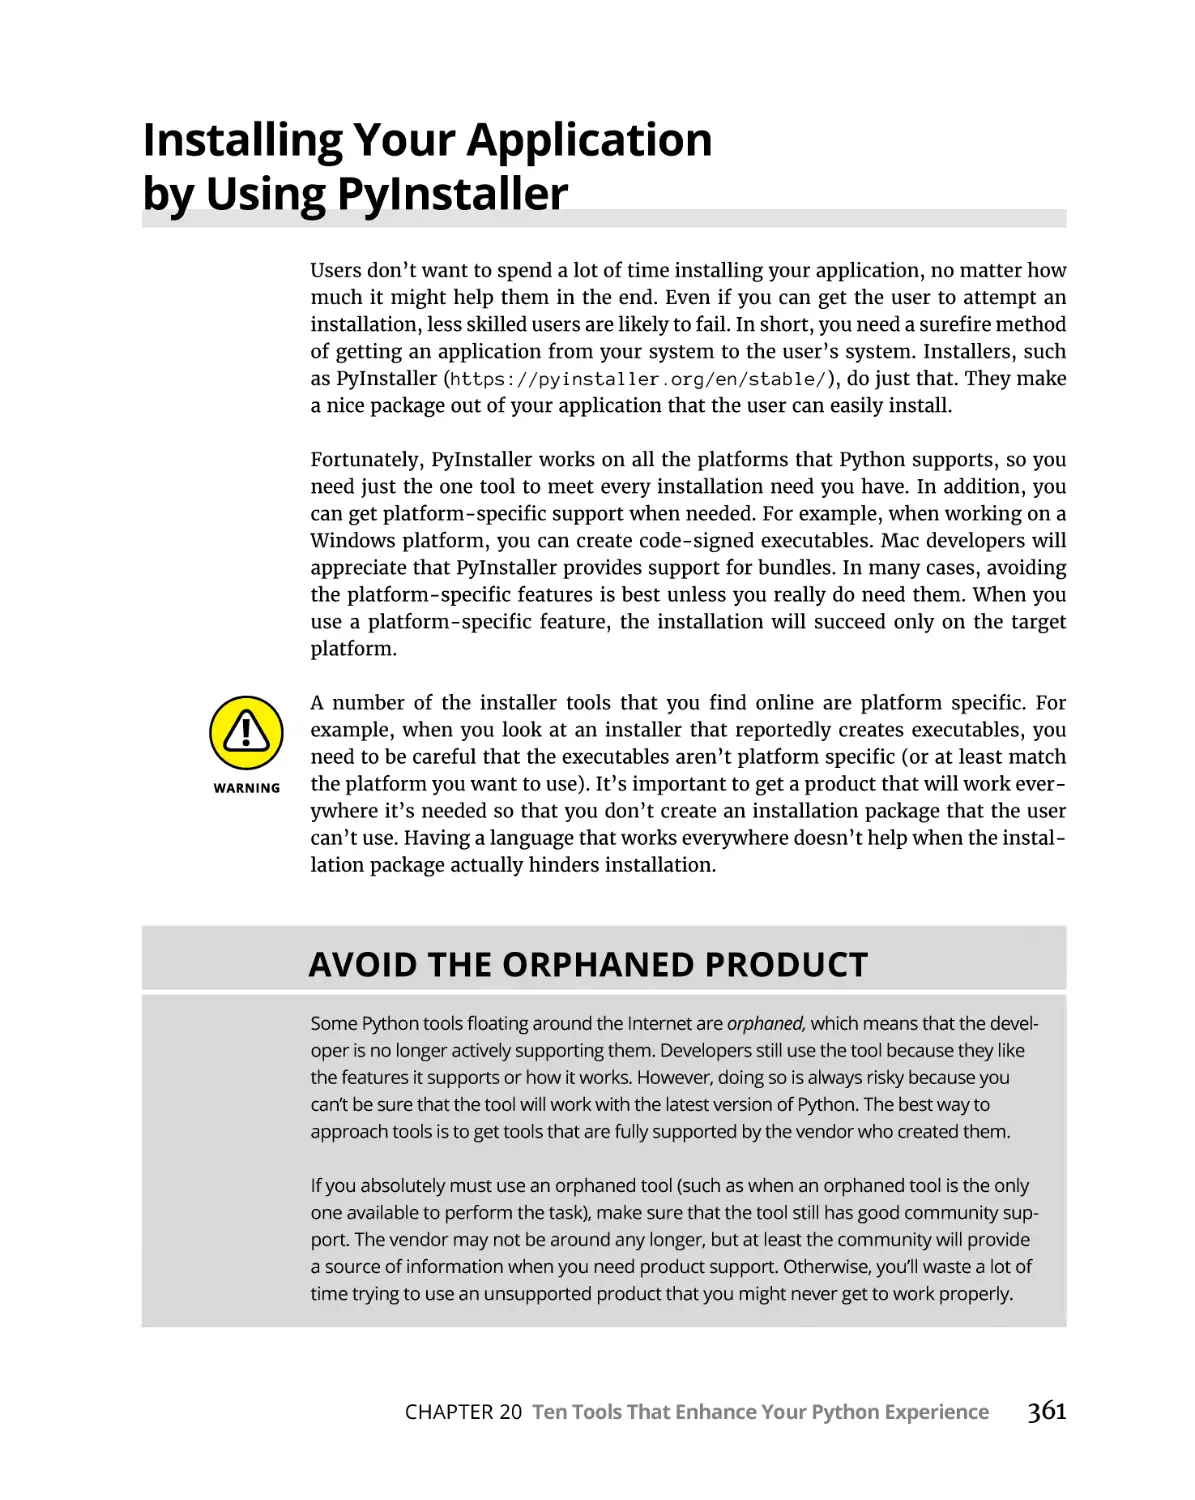 Installing Your Application by Using PyInstaller